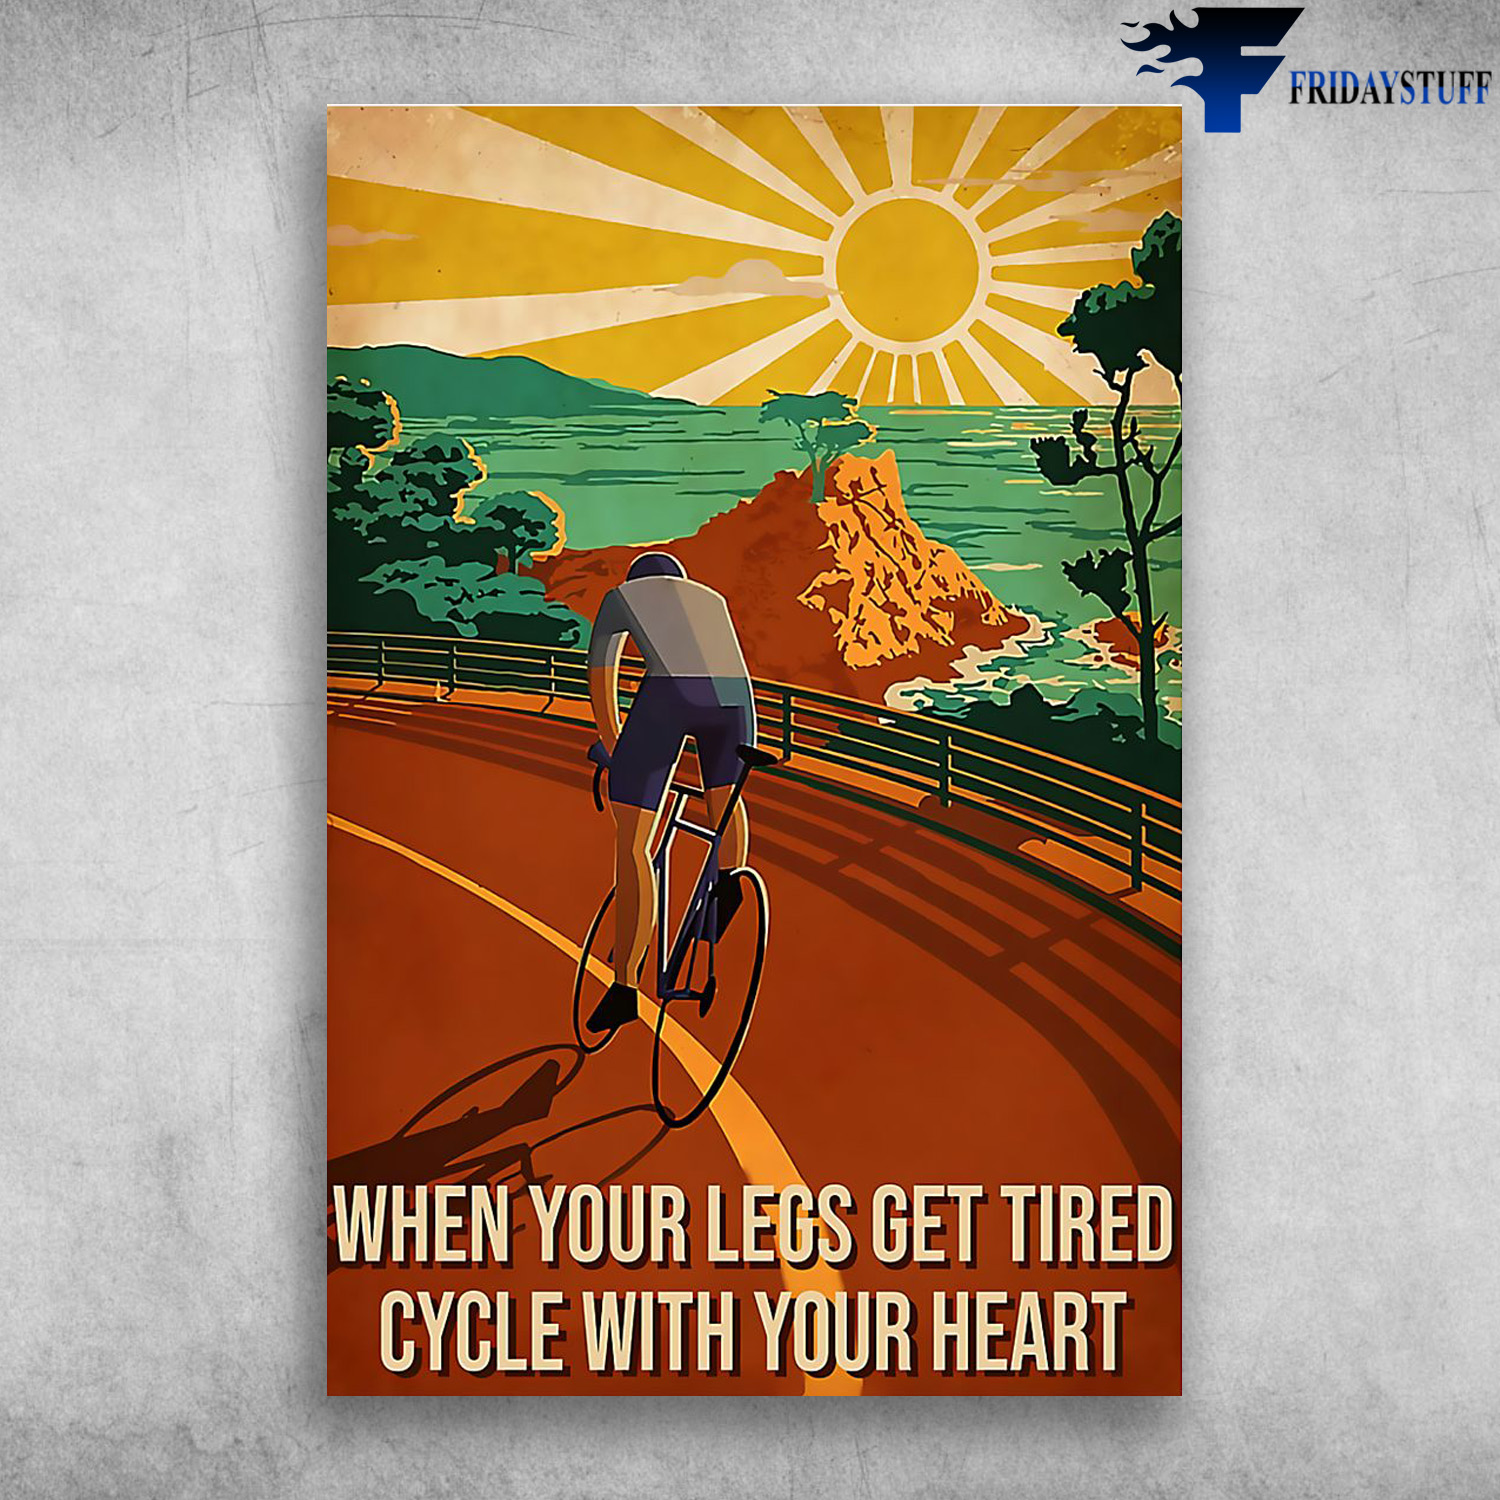 Man Riding Bicycle When Sunset - When Your Legs Get Tired